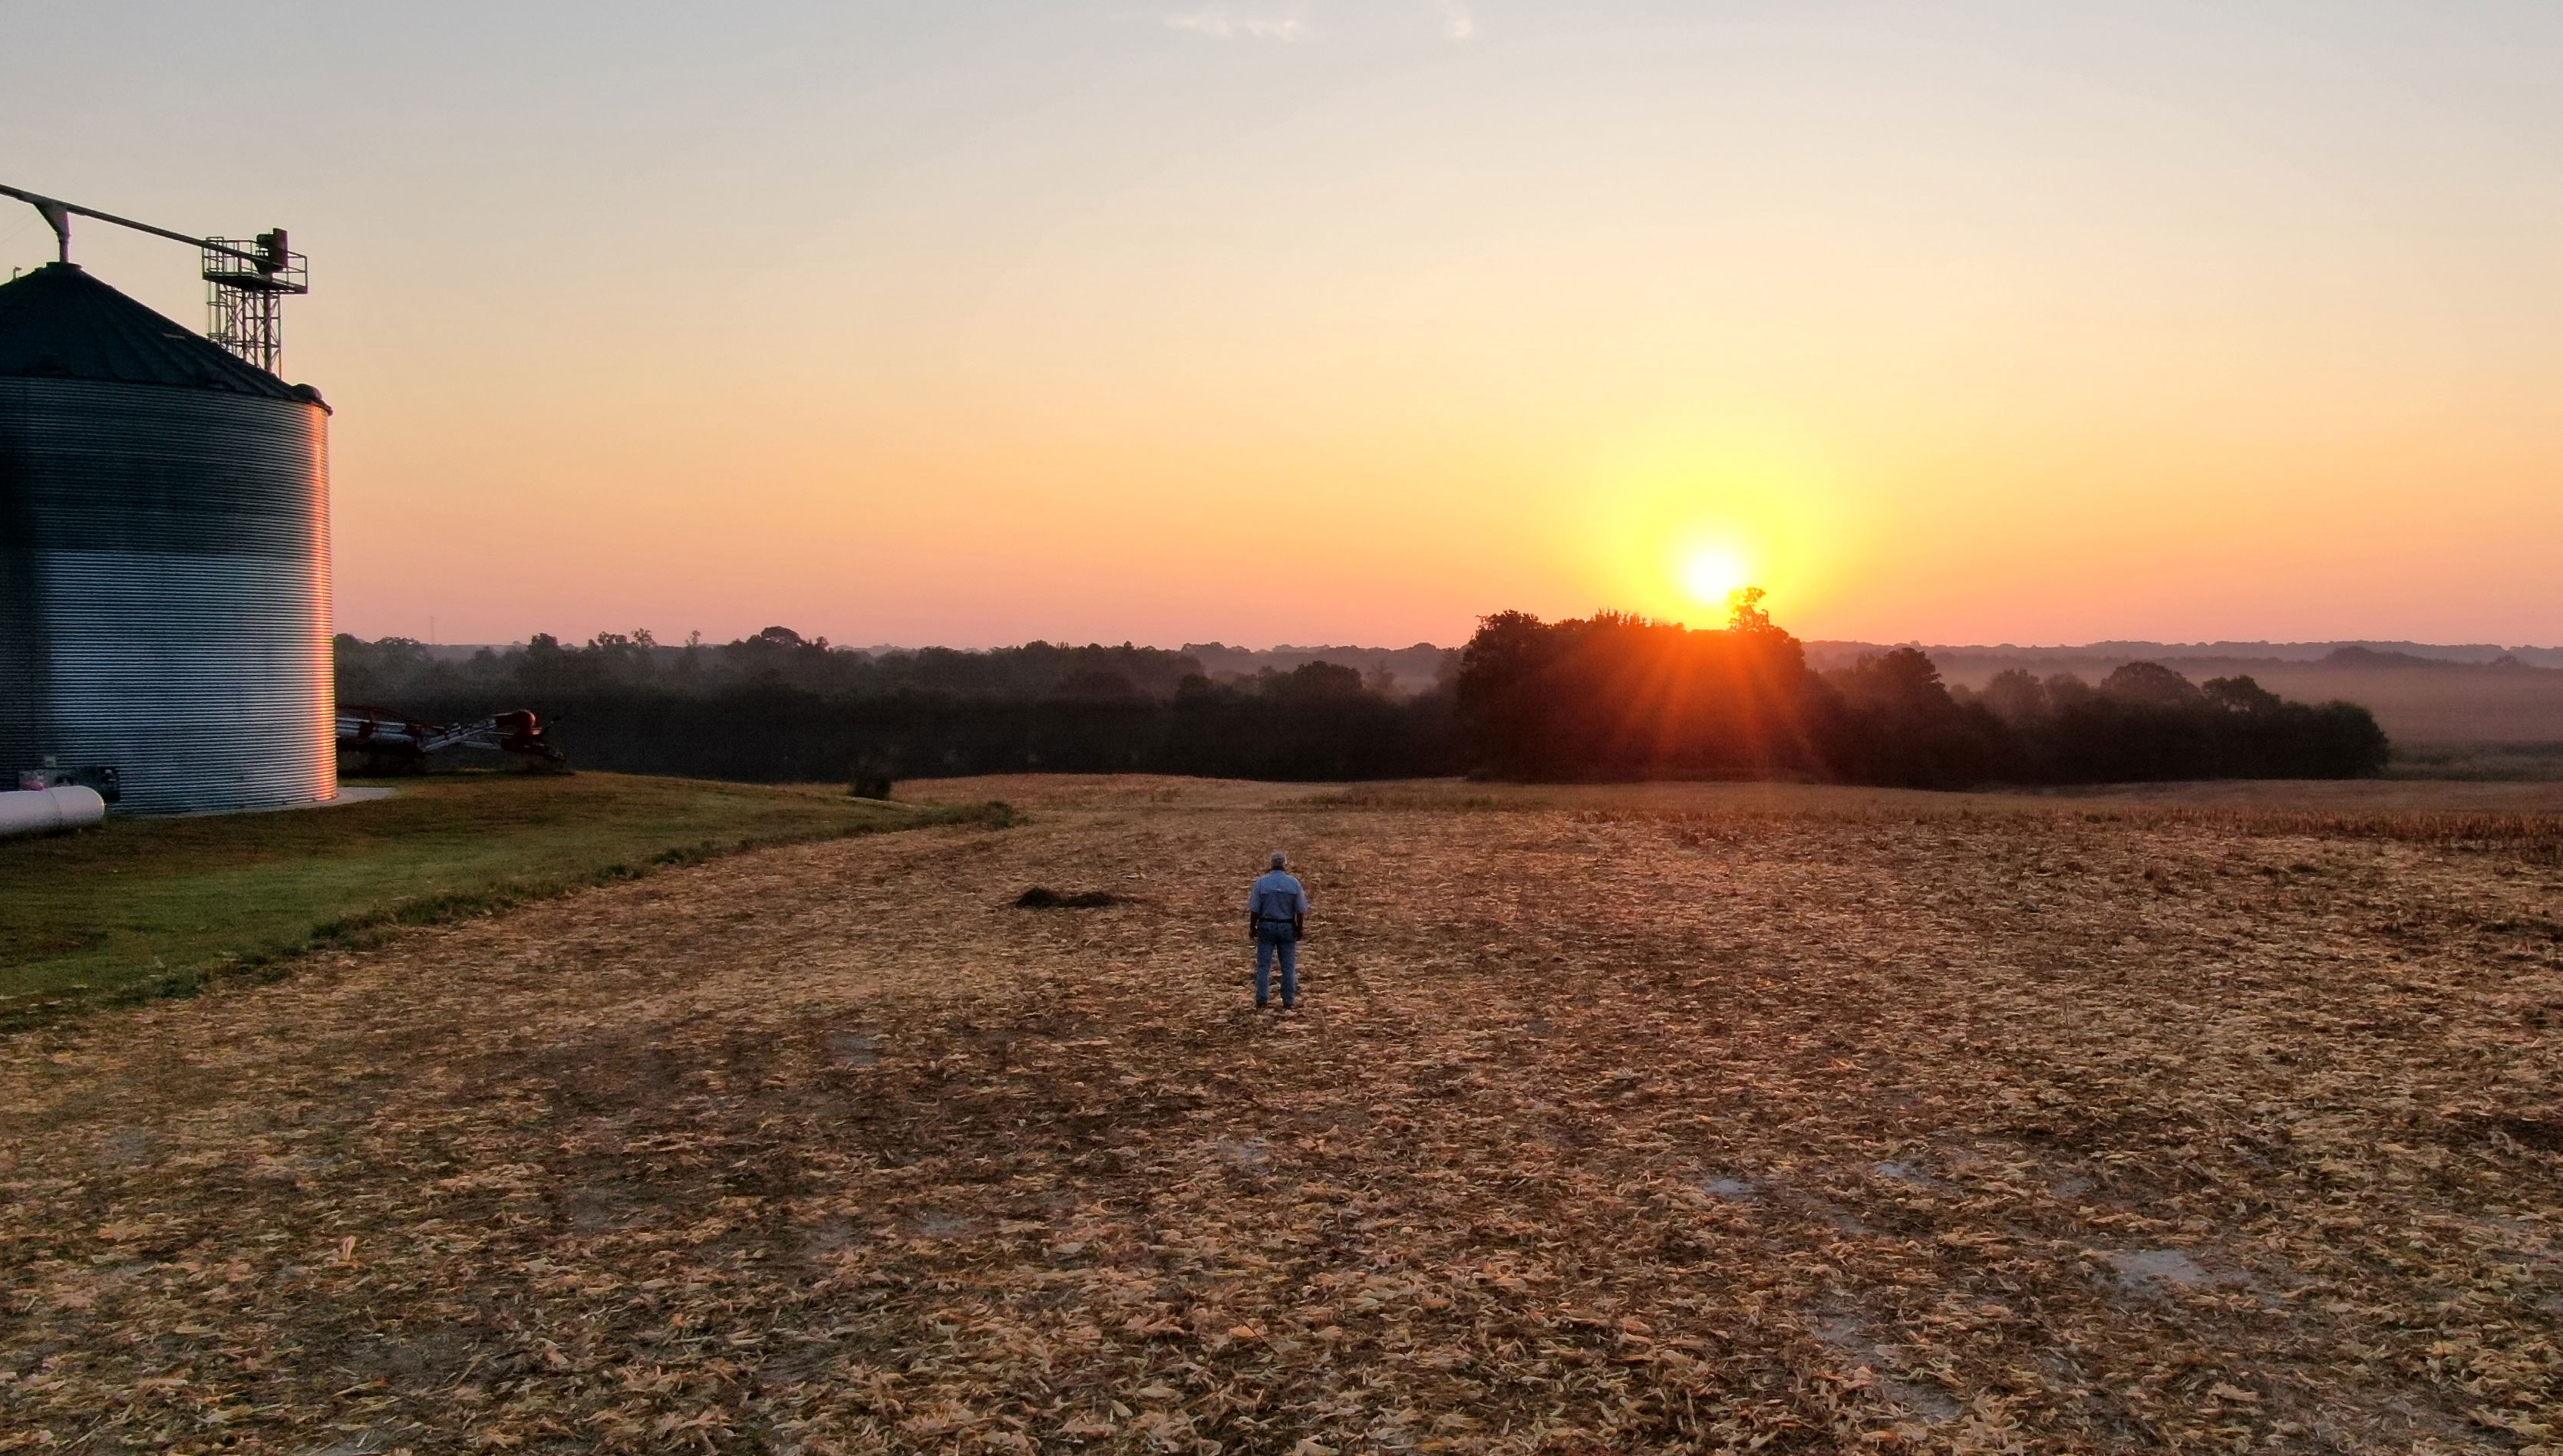 A farmer watching the sun rise in a bare, unplanted field.